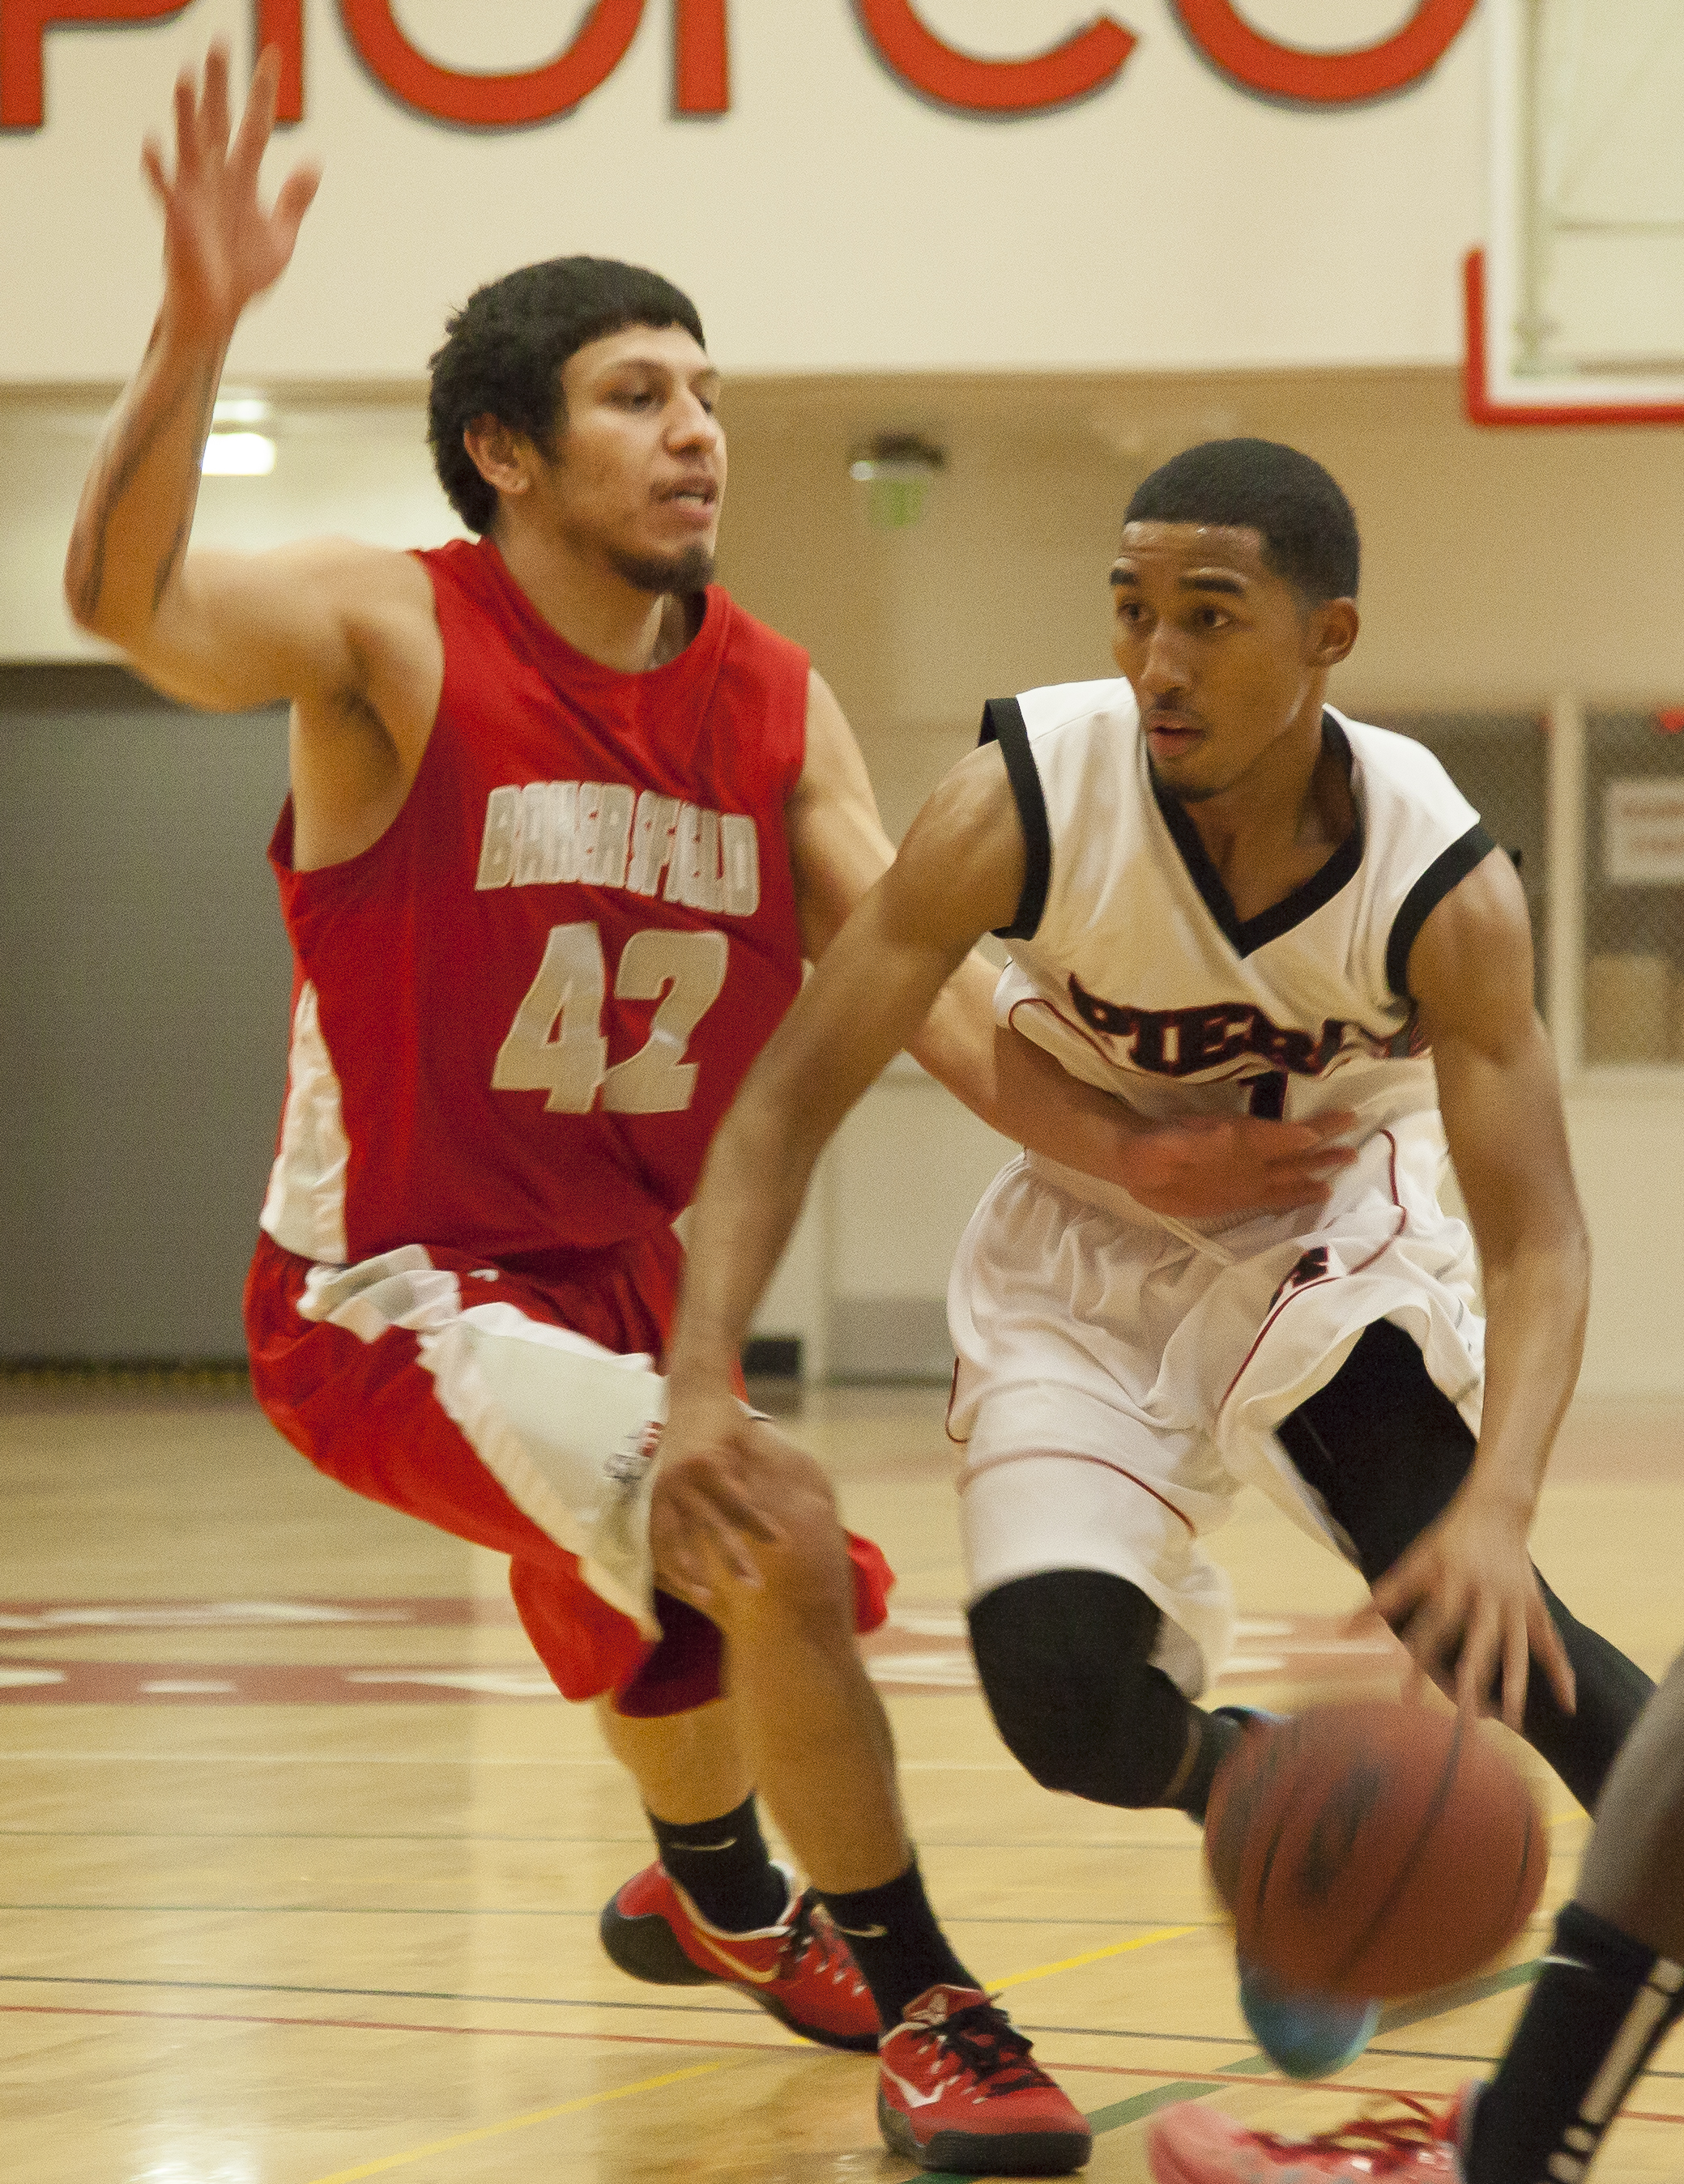  Pierce point guard JR Williams dribbles past Bakersfield guard Austin Welch during an important game that would determine who advances to the playoffs. Pierce would win the game in overtime, 95-92. Wednesday Feb. 25, 2015. Woodland Hills, Calif.  Fu